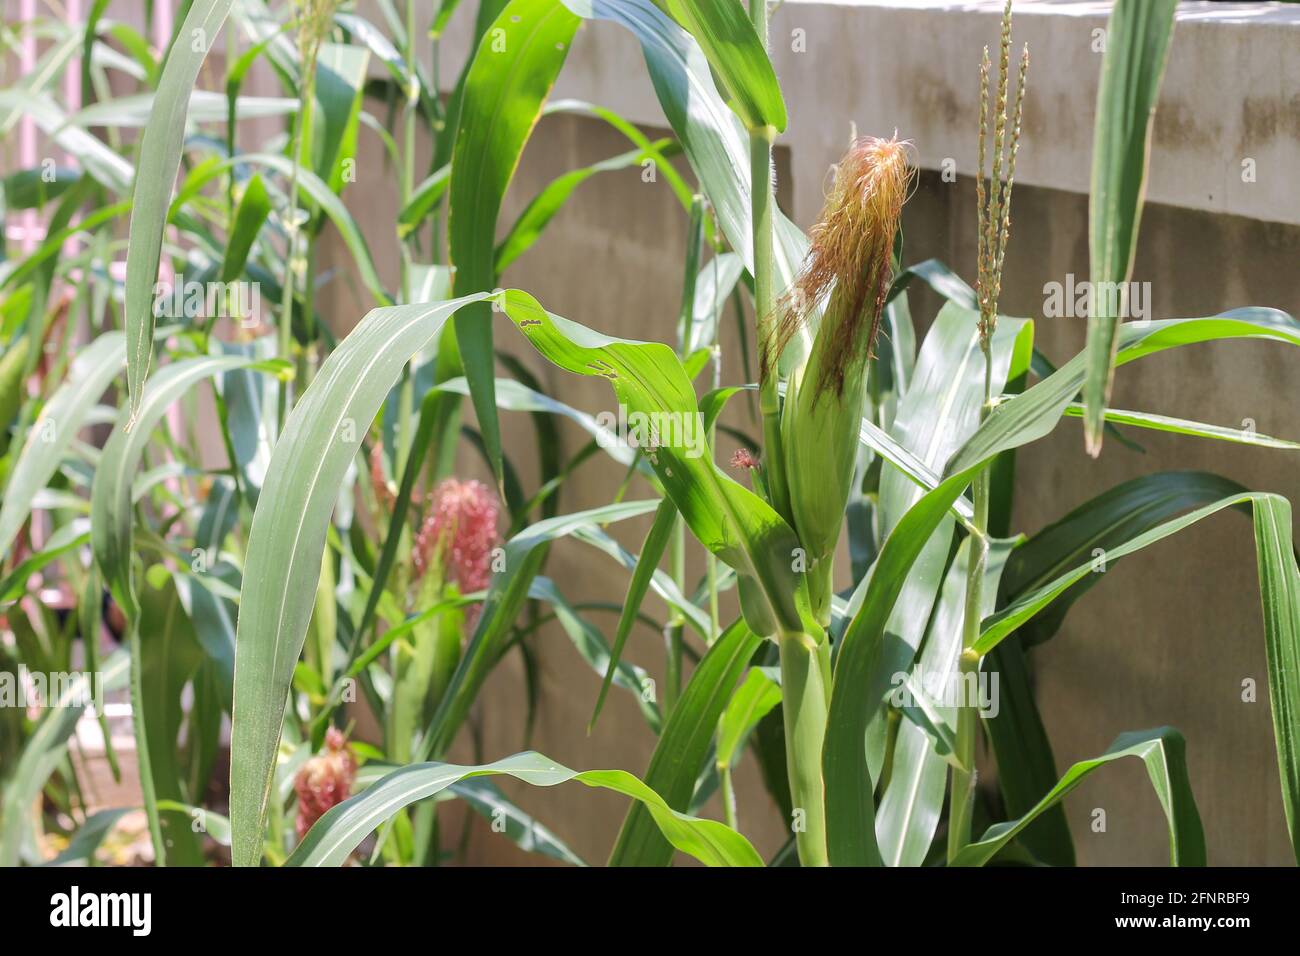 Corn plants were planted around the house in a small area to serve as food. Stock Photo